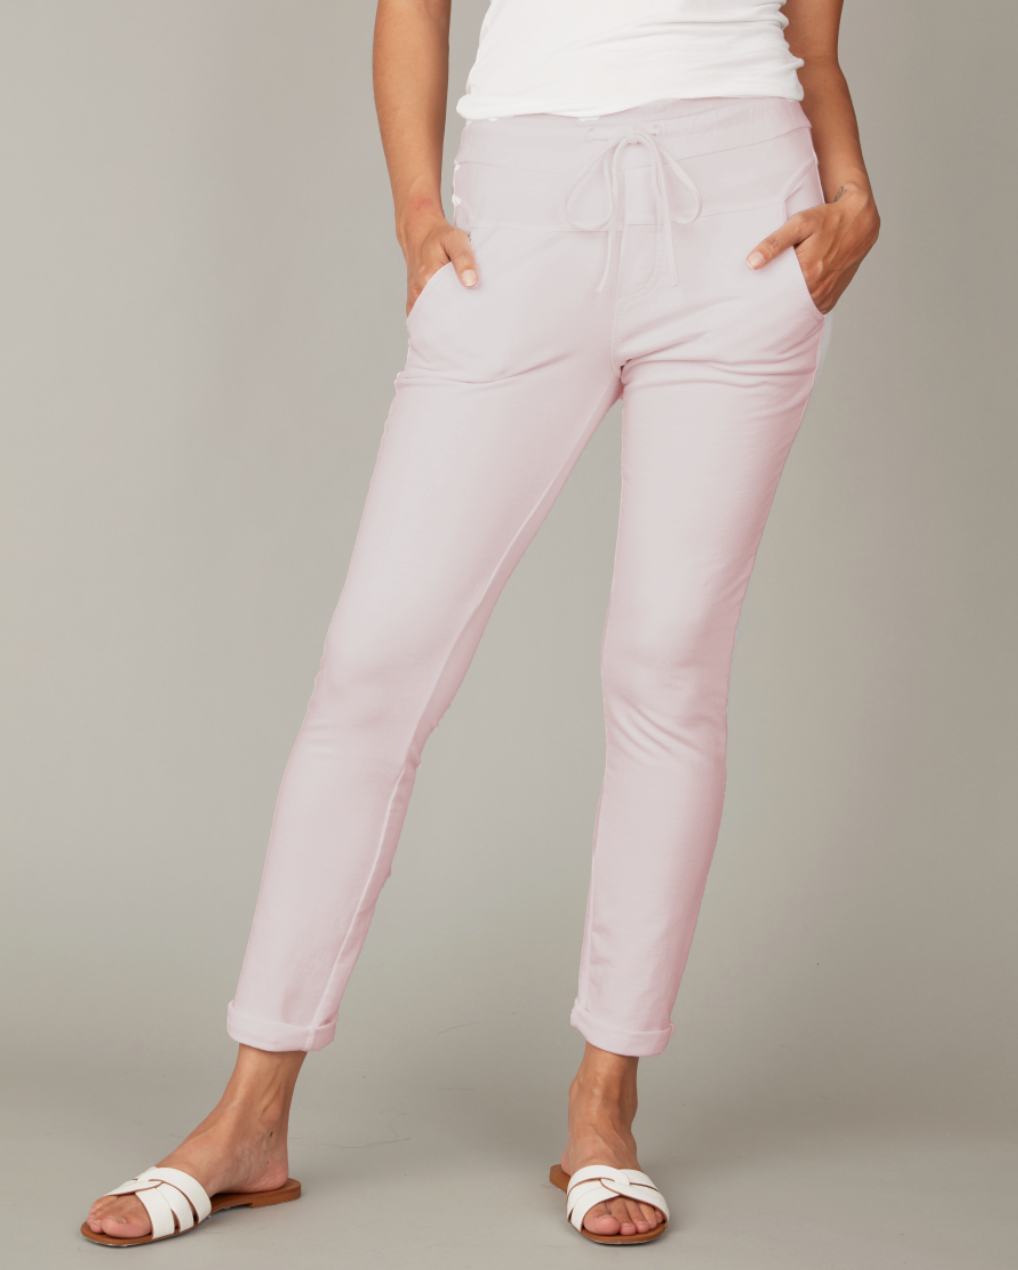 Fitted Terry Pants - Petal